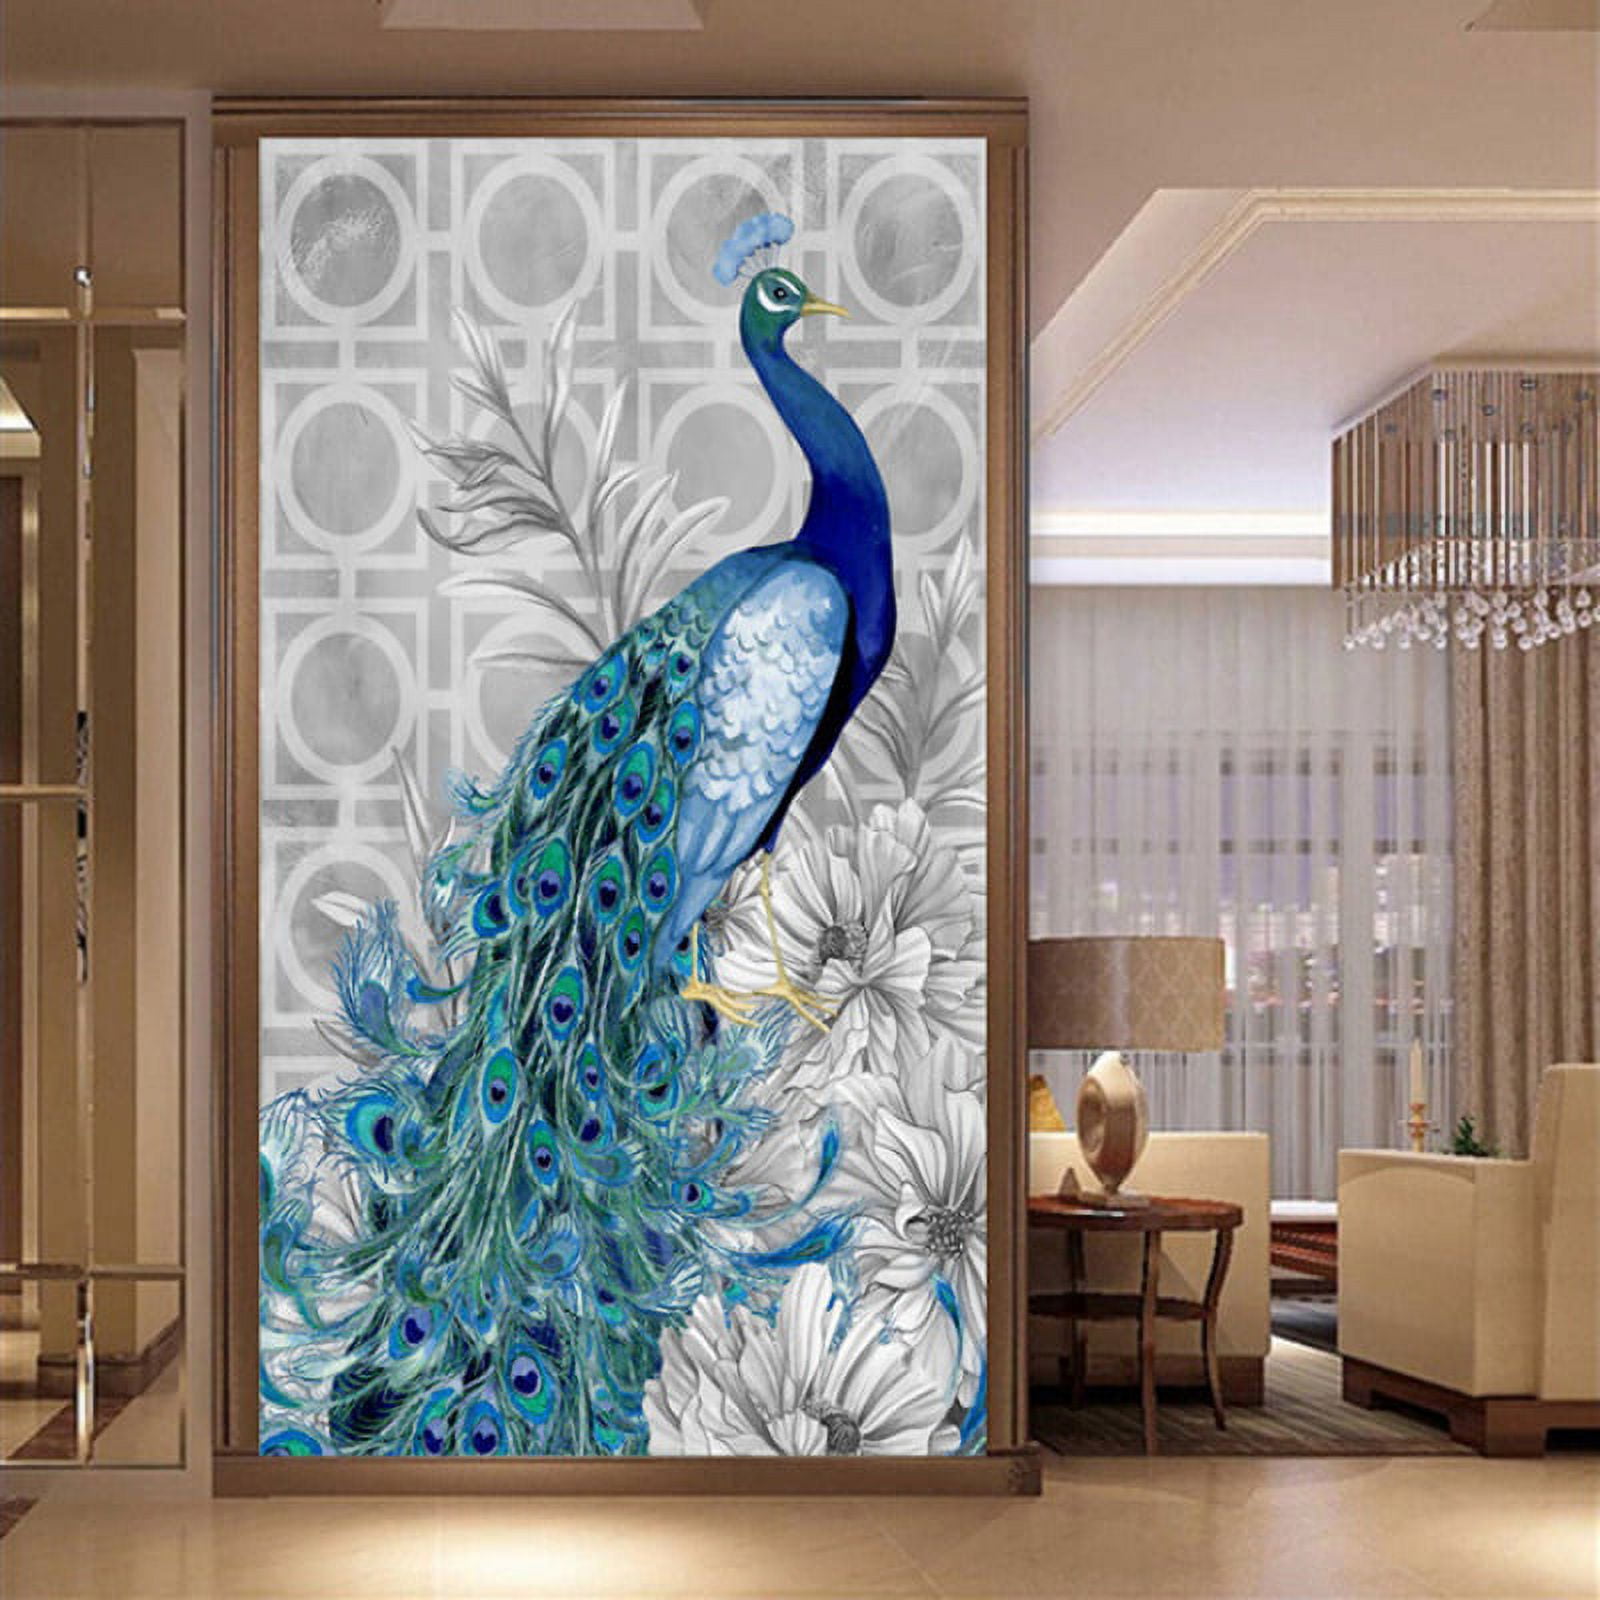  IEFSCAY Adult Diamond Painting Kits - Flower Branch Peacock Diamond  Painting Beginner Friendly and Easy to Install DIY Crafts, Wall Decor Room  Decorn Sparkling Gemstone Painting 12x12inch